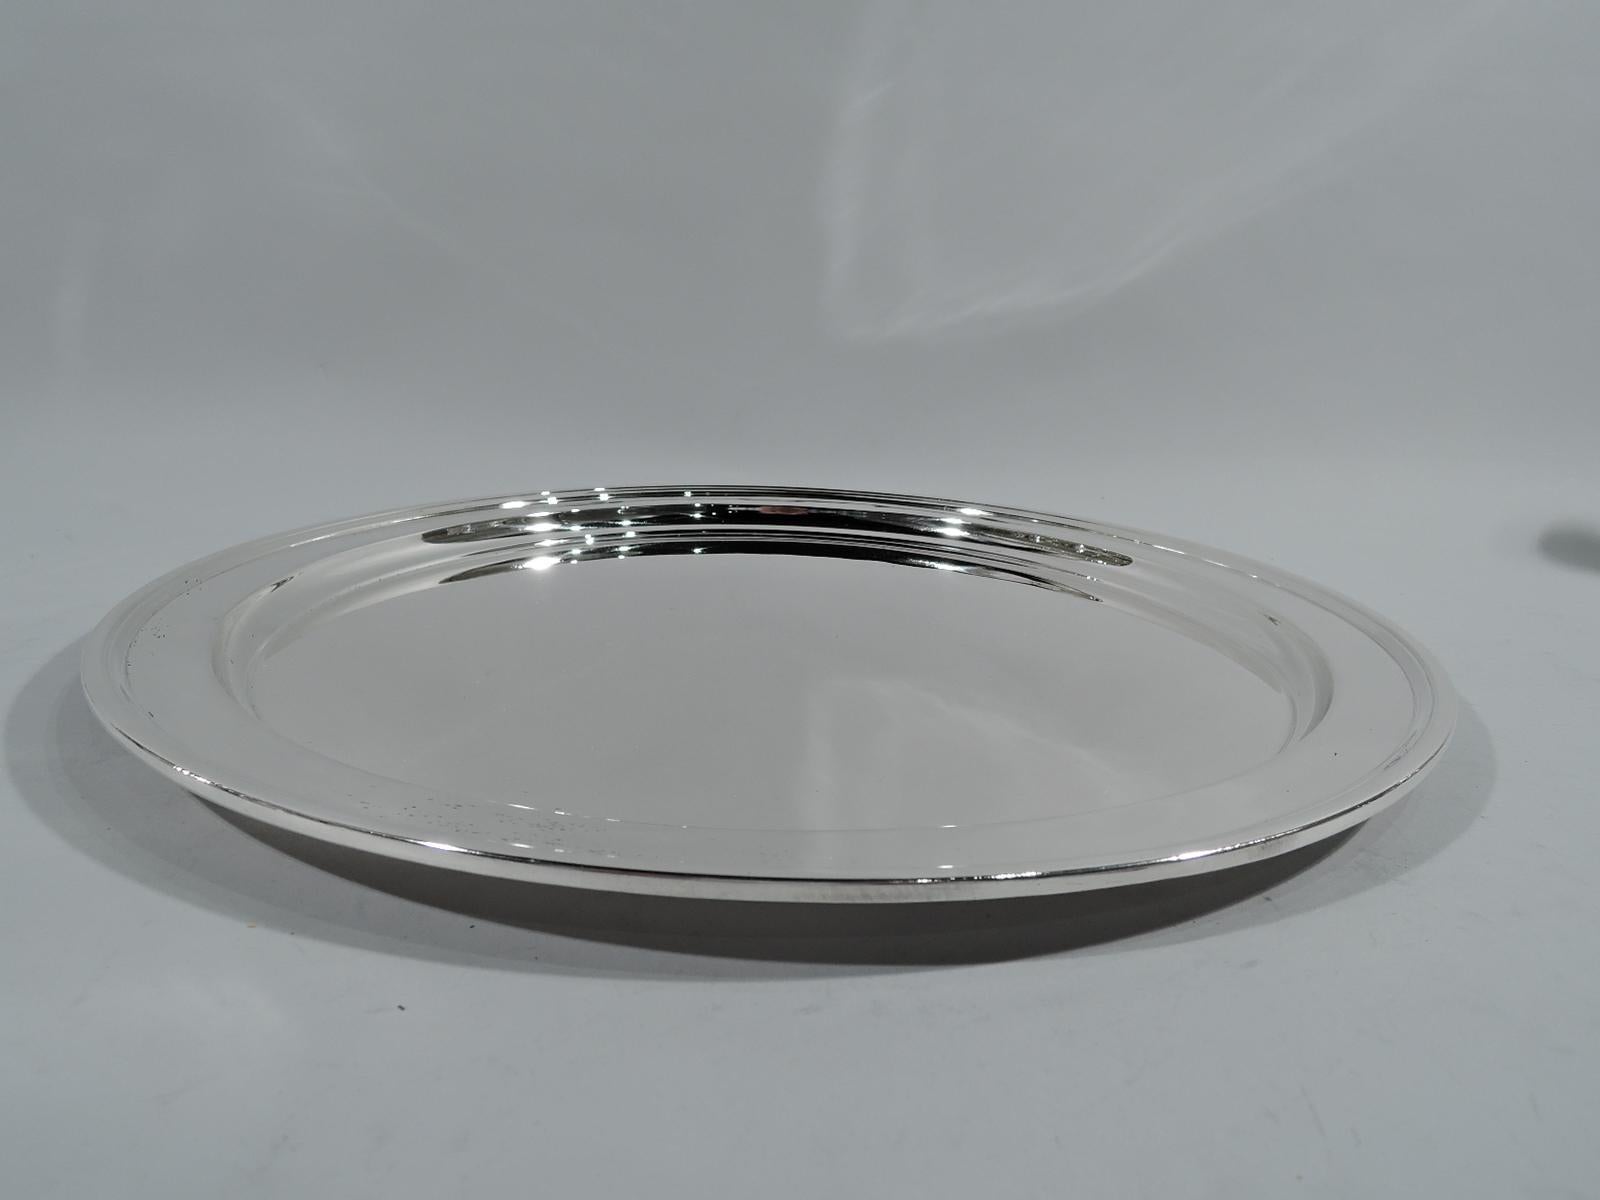 Modern sterling silver serving tray. Made by Tiffany & Co. in New York. Round with well, tapering shoulder, and molded rim. Hallmark includes pattern no. 20221 (first produced in 1923) and director’s letter m (1907-47). Weight: 37.5 troy ounces.